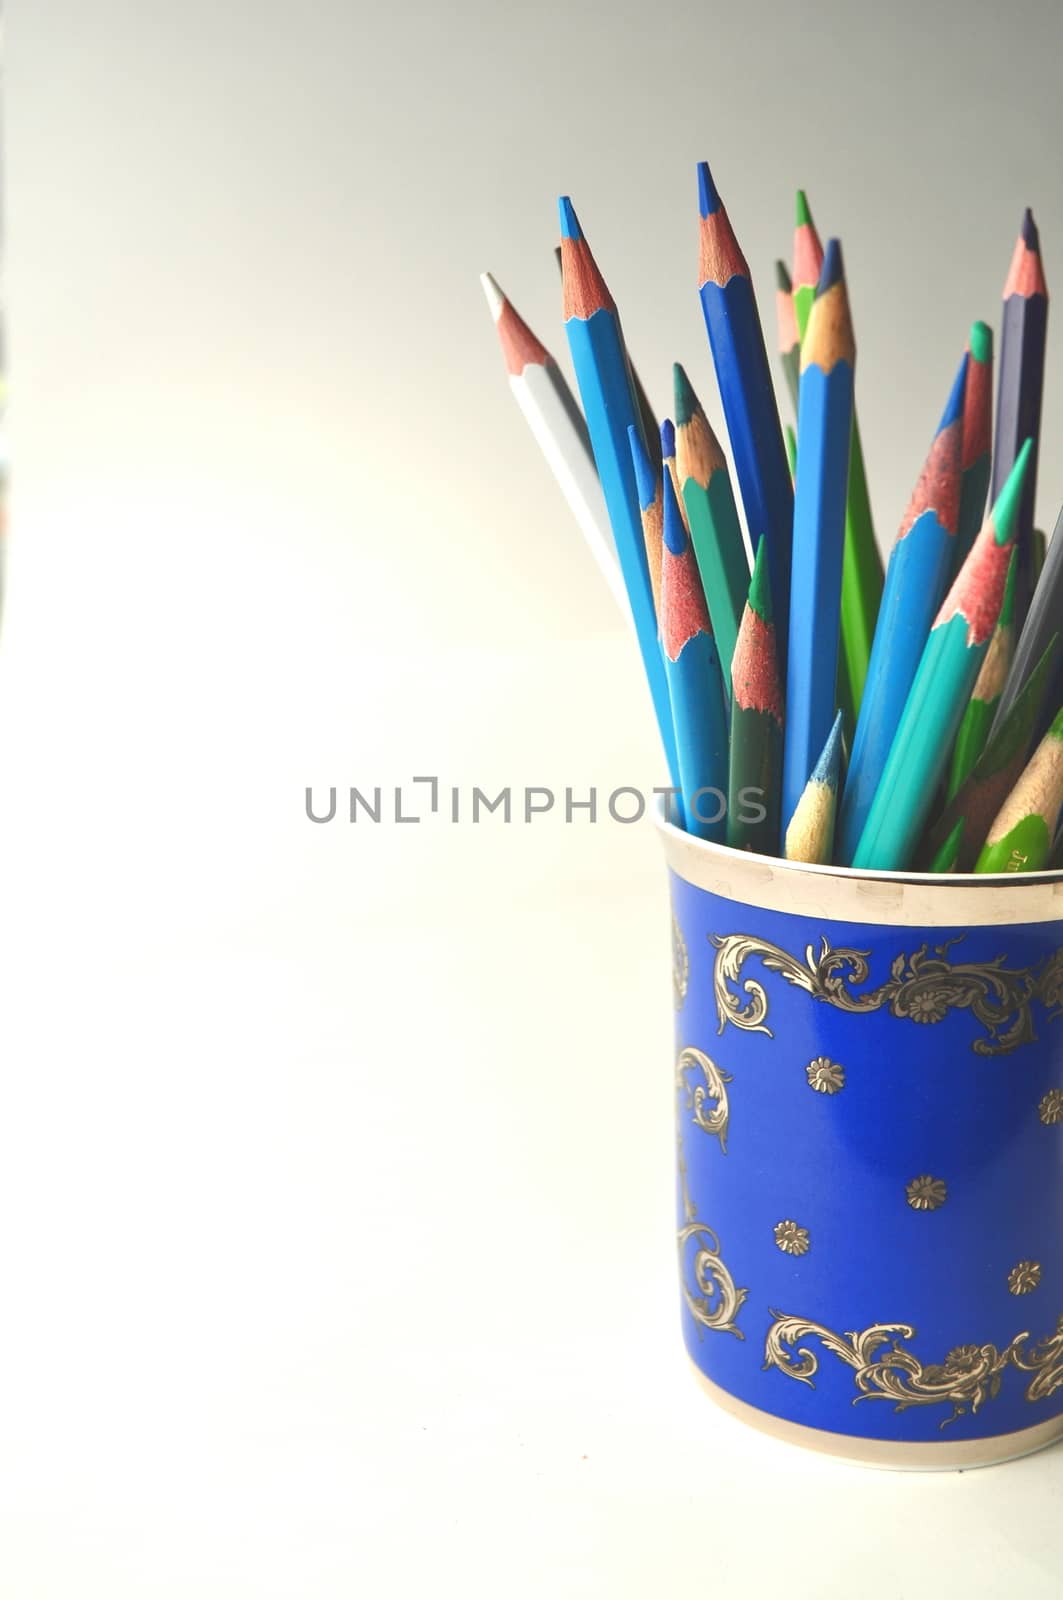 Blue porcelain cup with colorful pencils on grey, white and blue background with copy space